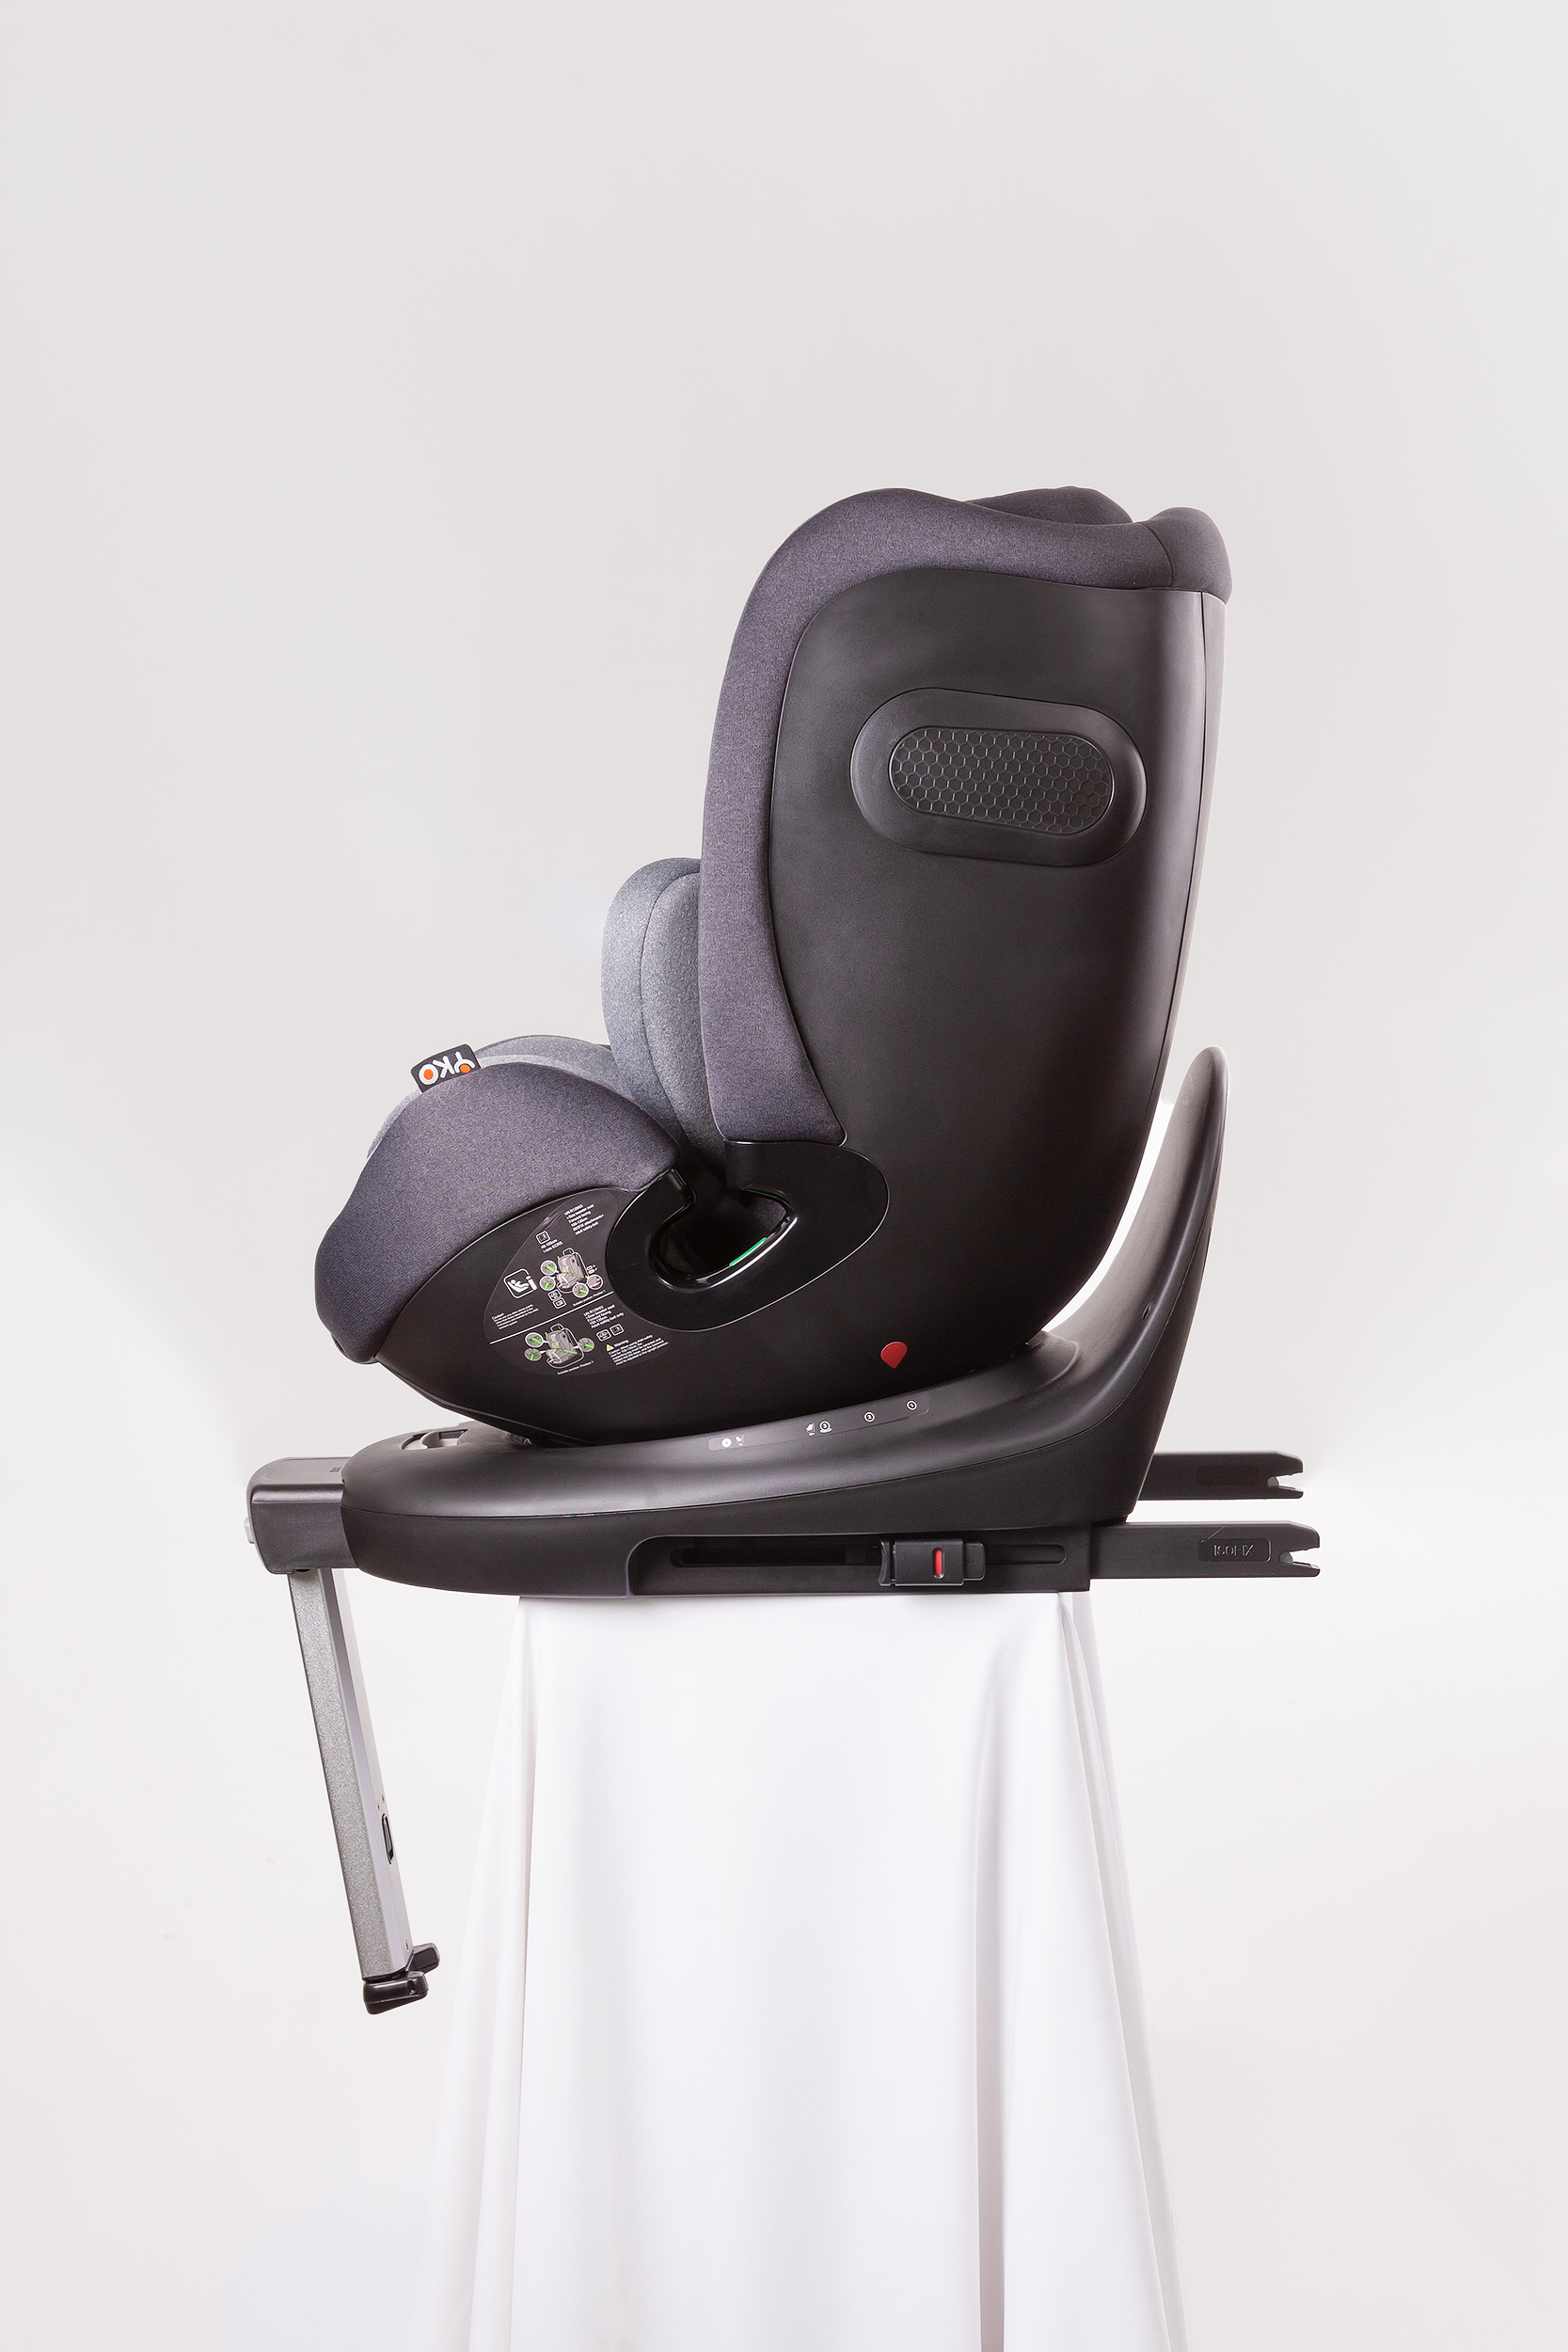 360 car seat from birth